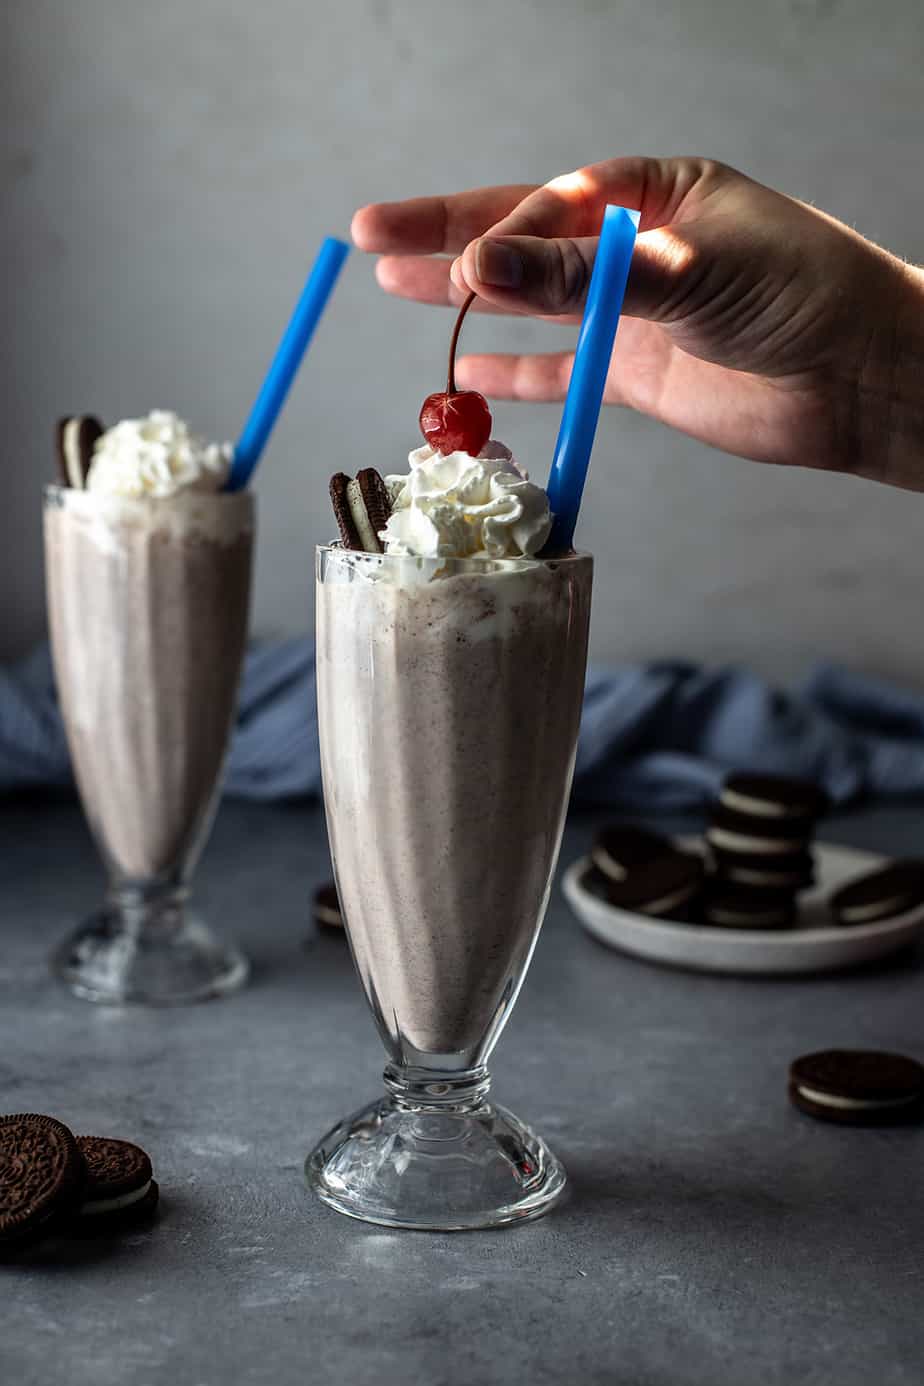 two glasses with cookies and cream milkshakes, a hand is placing a cherry on the top of one